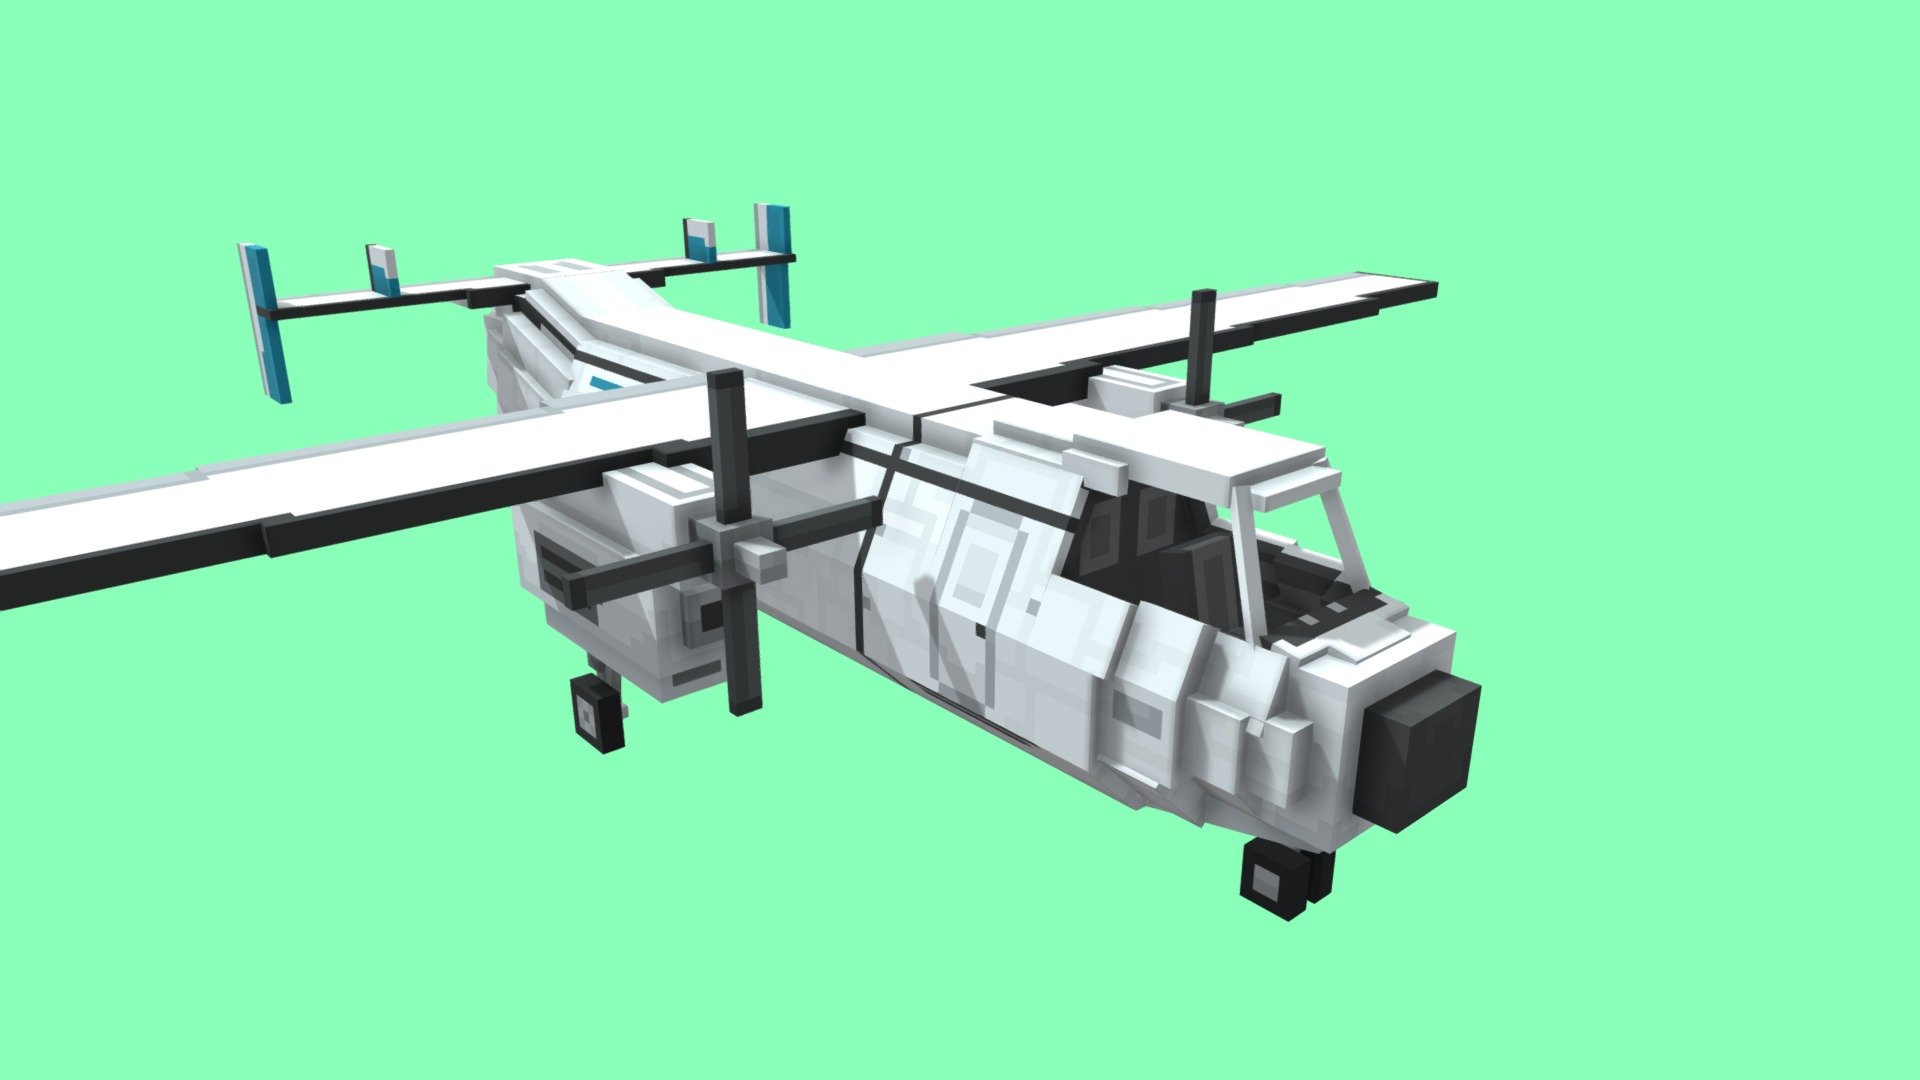 A plane made in Blockbench for Minecraft Bedrock Edition for the Marketplace map “Military Navy” by Vaeron - Cargo Aircraft - 3D model by JannisX11 3d model